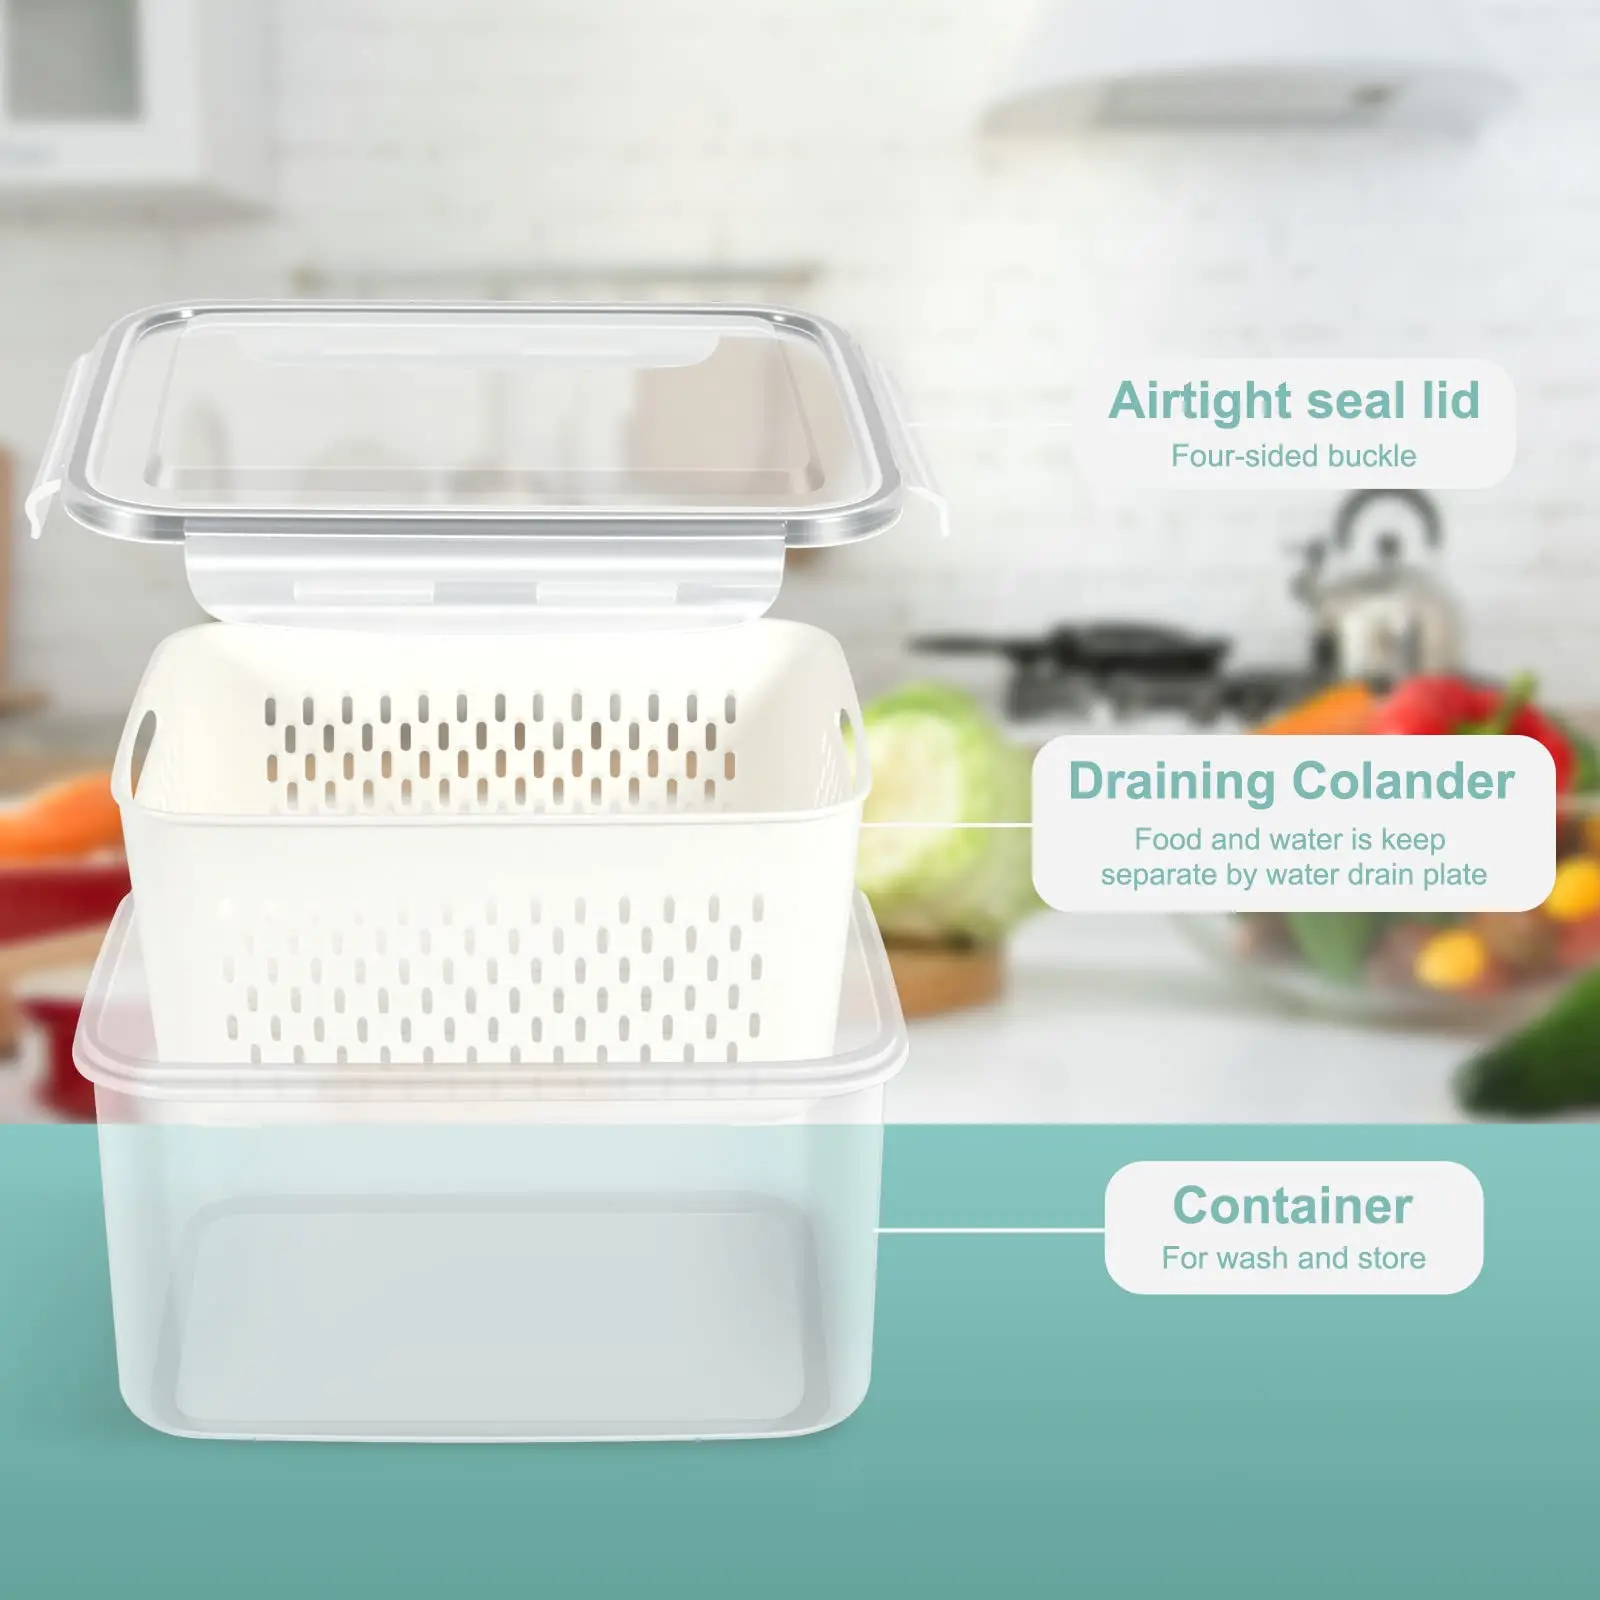 https://ae01.alicdn.com/kf/S998de1c8b820432096edce6cd6915d0eo/Fridge-Food-Storage-Container-with-Lids-Plastic-Fresh-Produce-Saver-Keeper-for-Vegetable-Fruit-Kitchen-Refrigerator.jpg